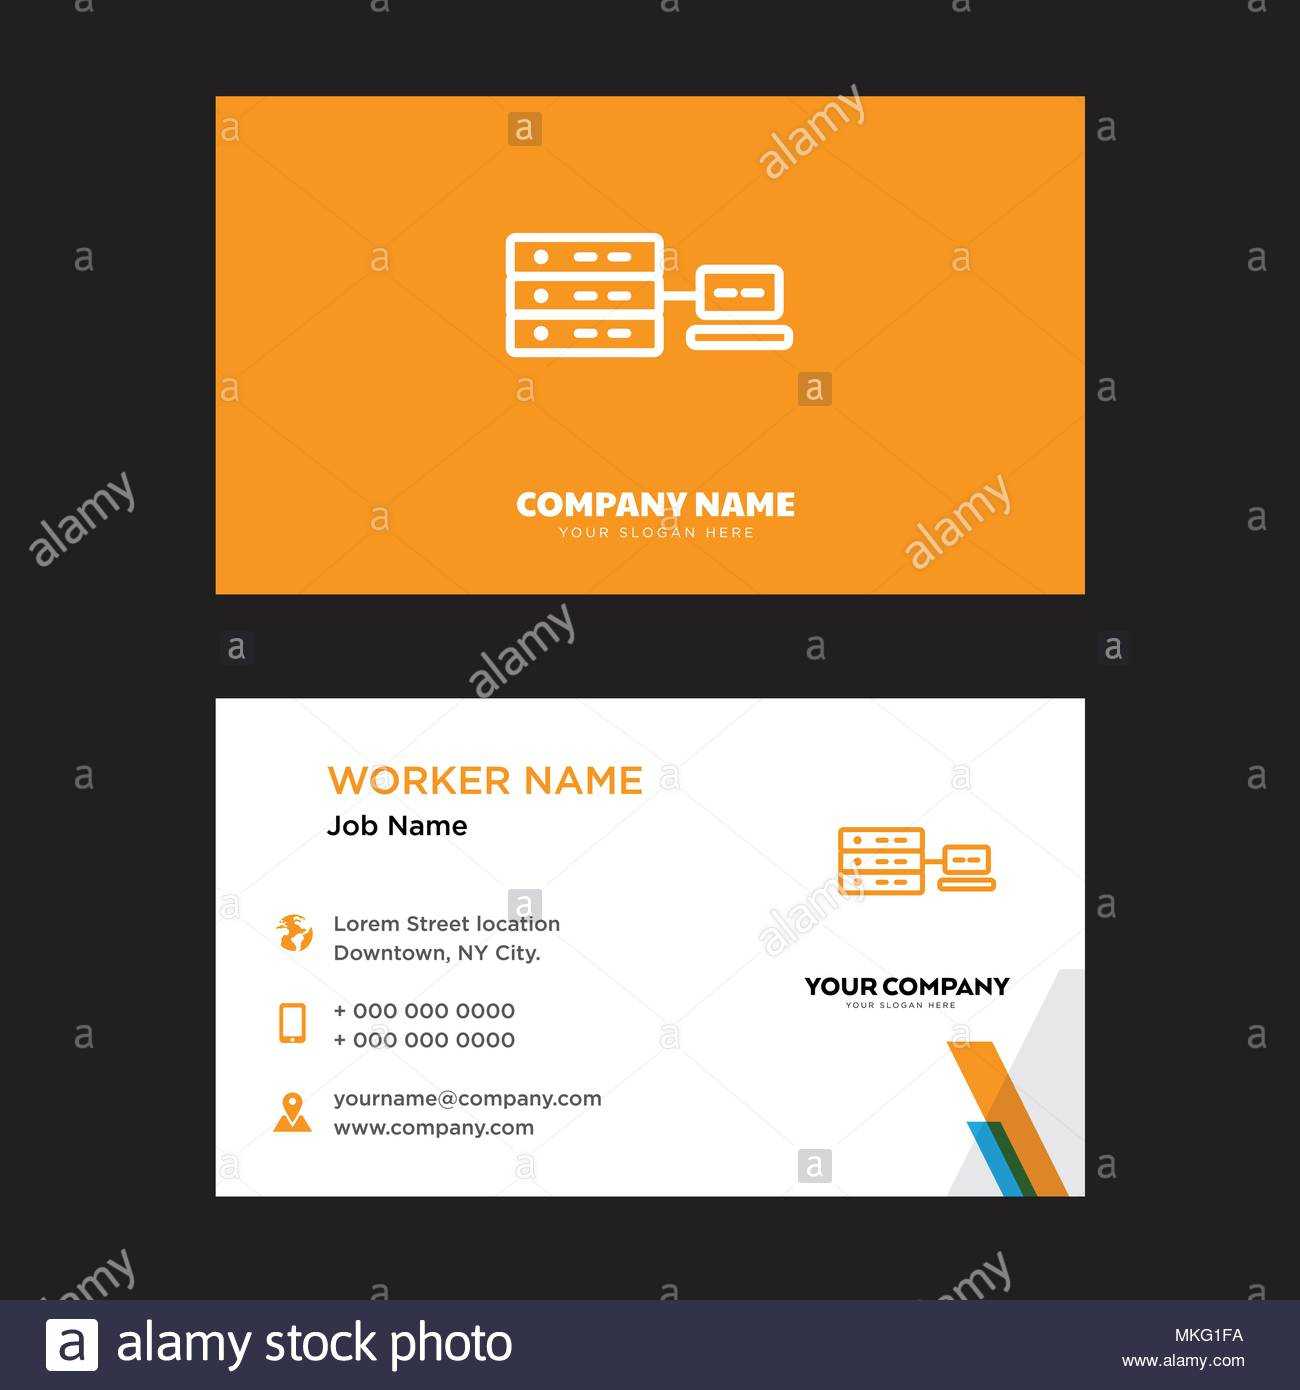 Networking Business Card Design Template, Visiting For Your Throughout Networking Card Template